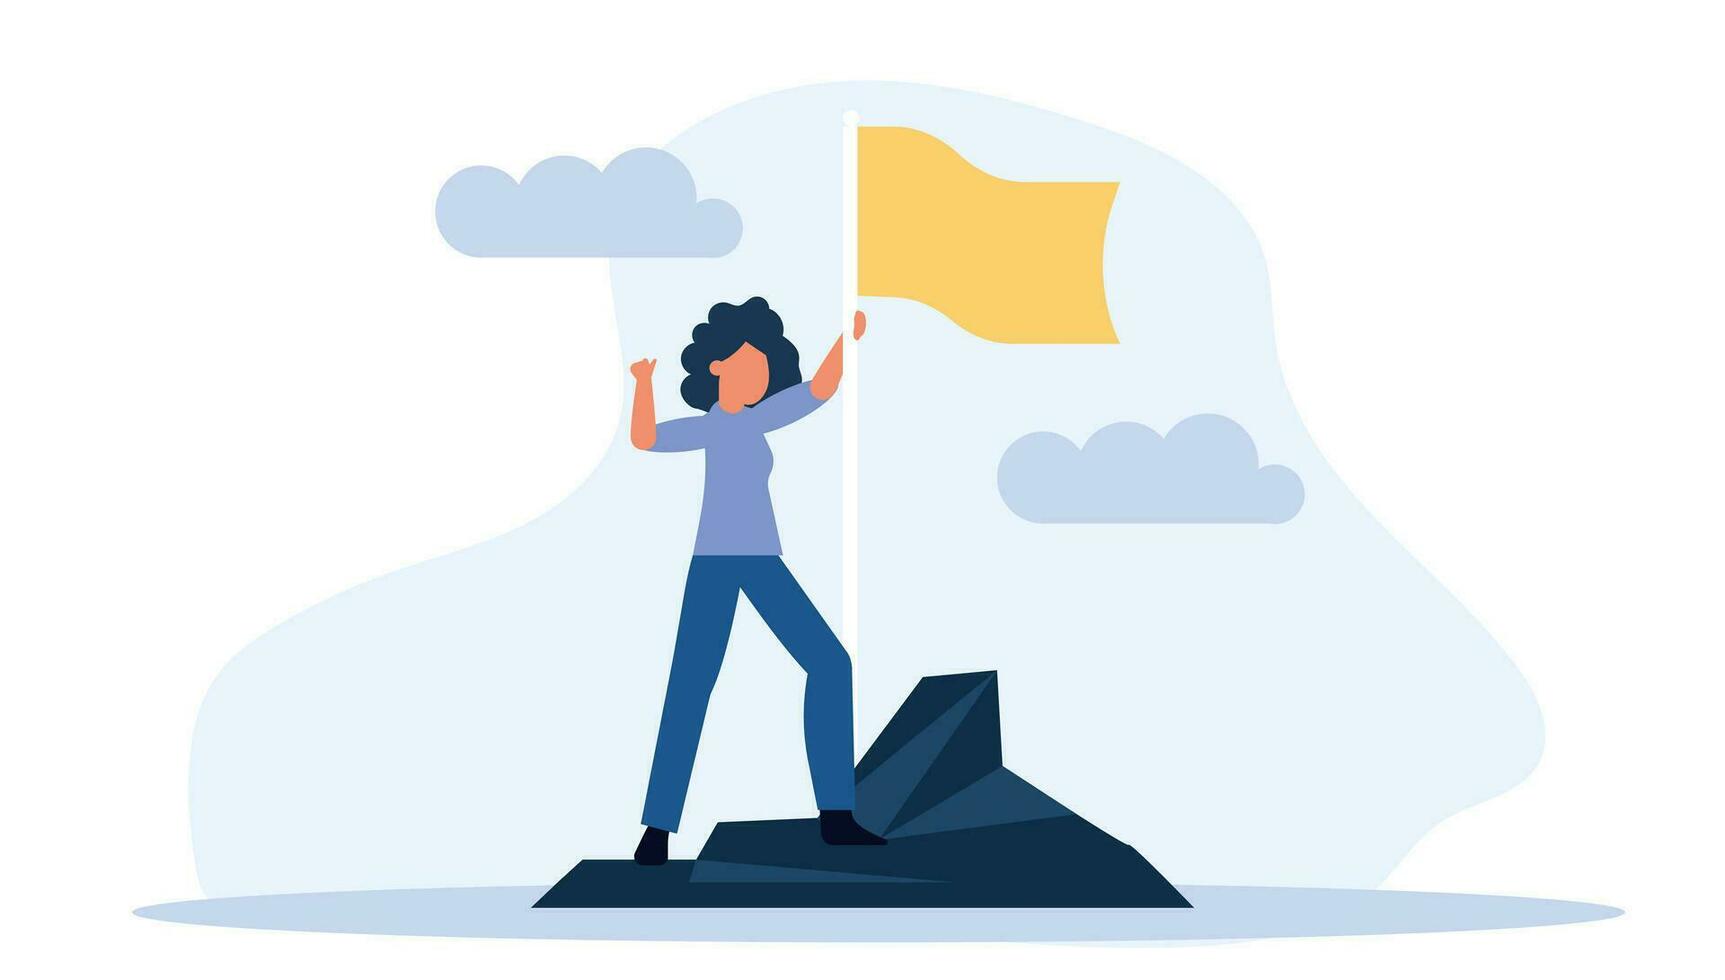 Woman climbed to the top mountain with flag flat illustration achievement concept. Business goal leadership career winner. Climb growth employee motivation vision. Up hill direction challenge peak vector